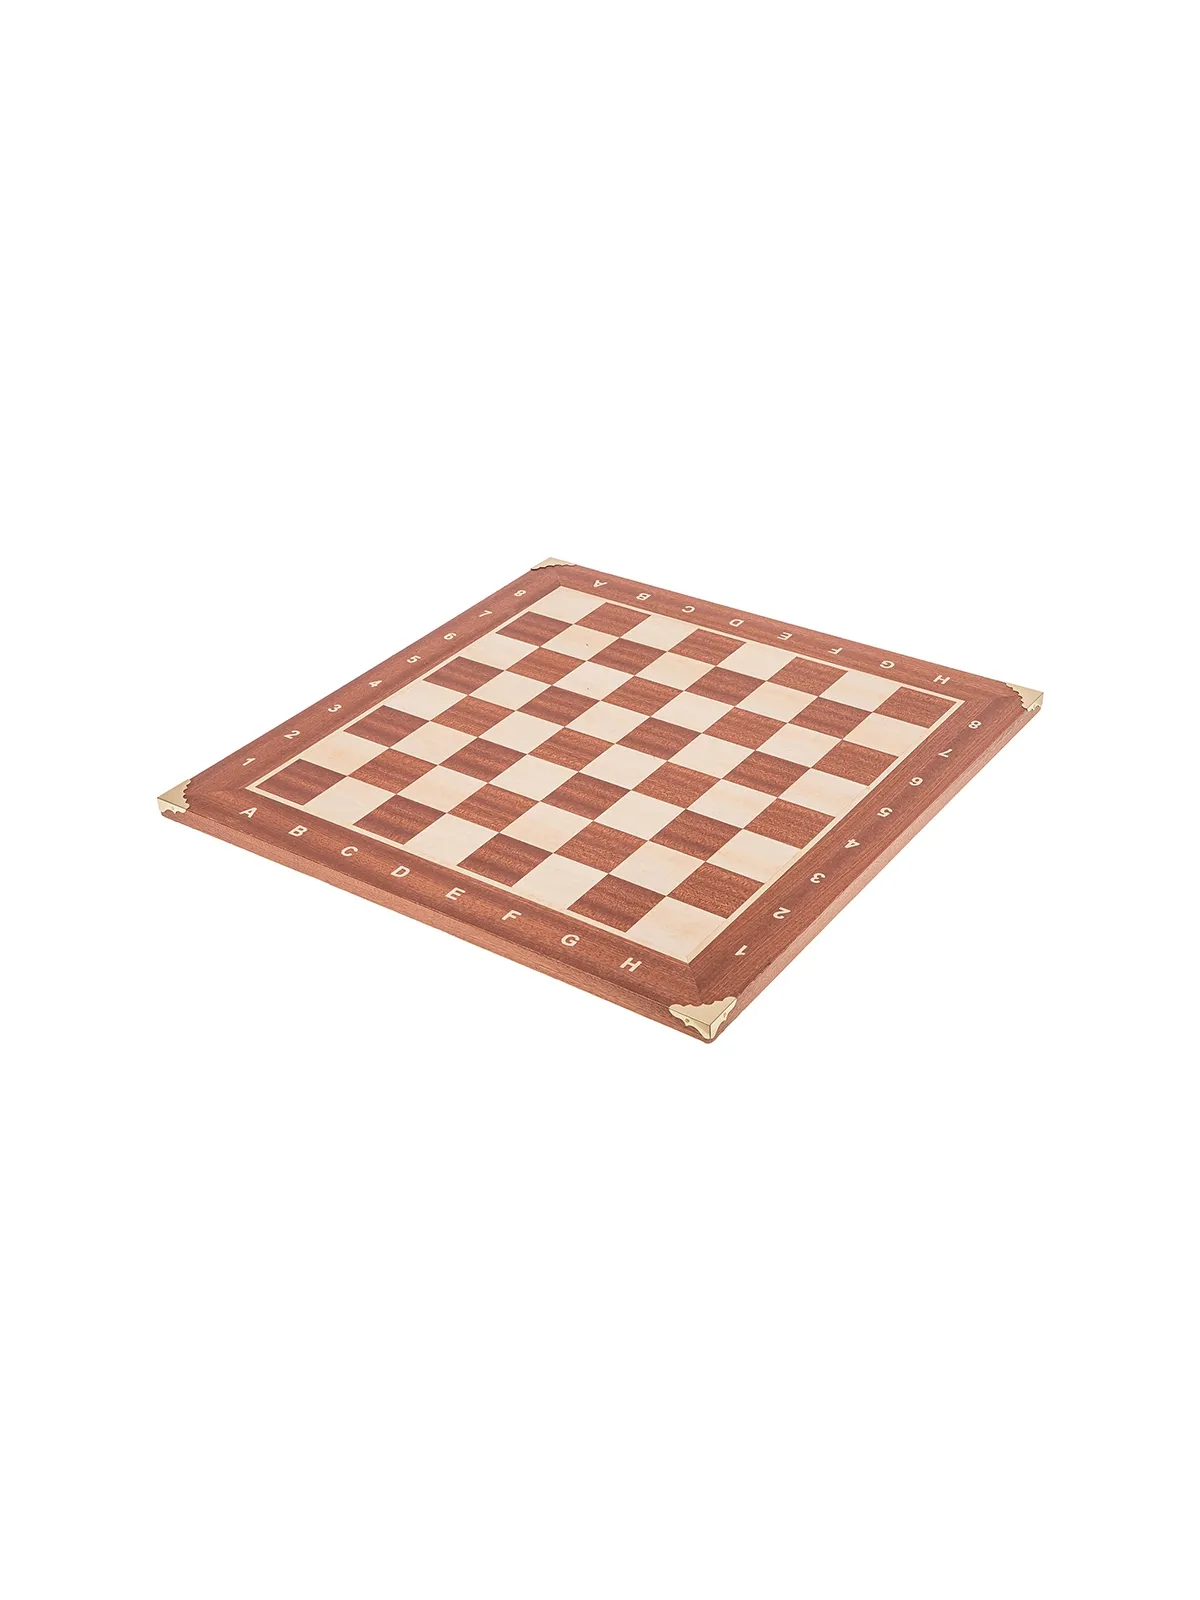 Chessboard No. 5 - France